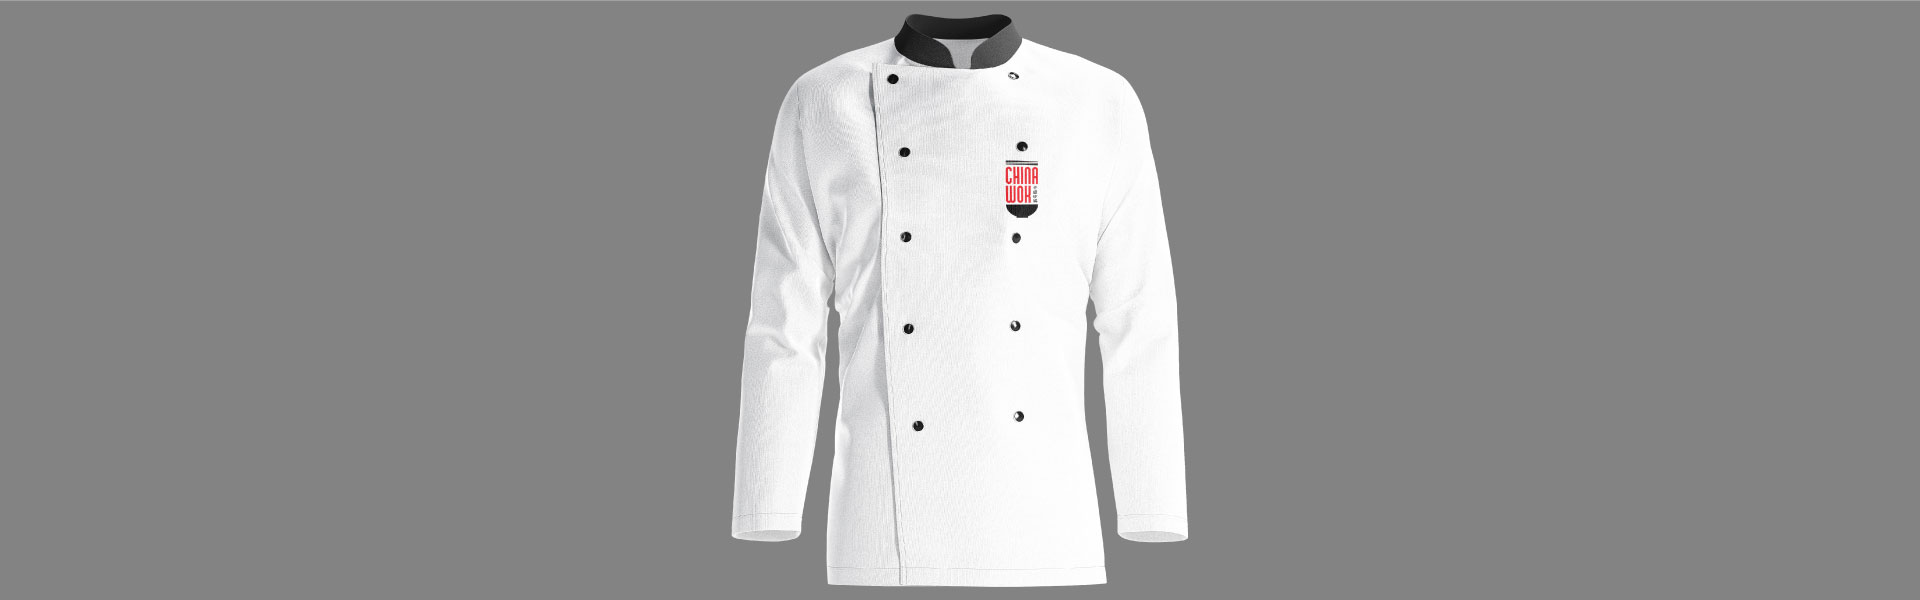 china-wok-brand-logo-design-by-mapleweb-vancouver-canada-chef-suit-mock